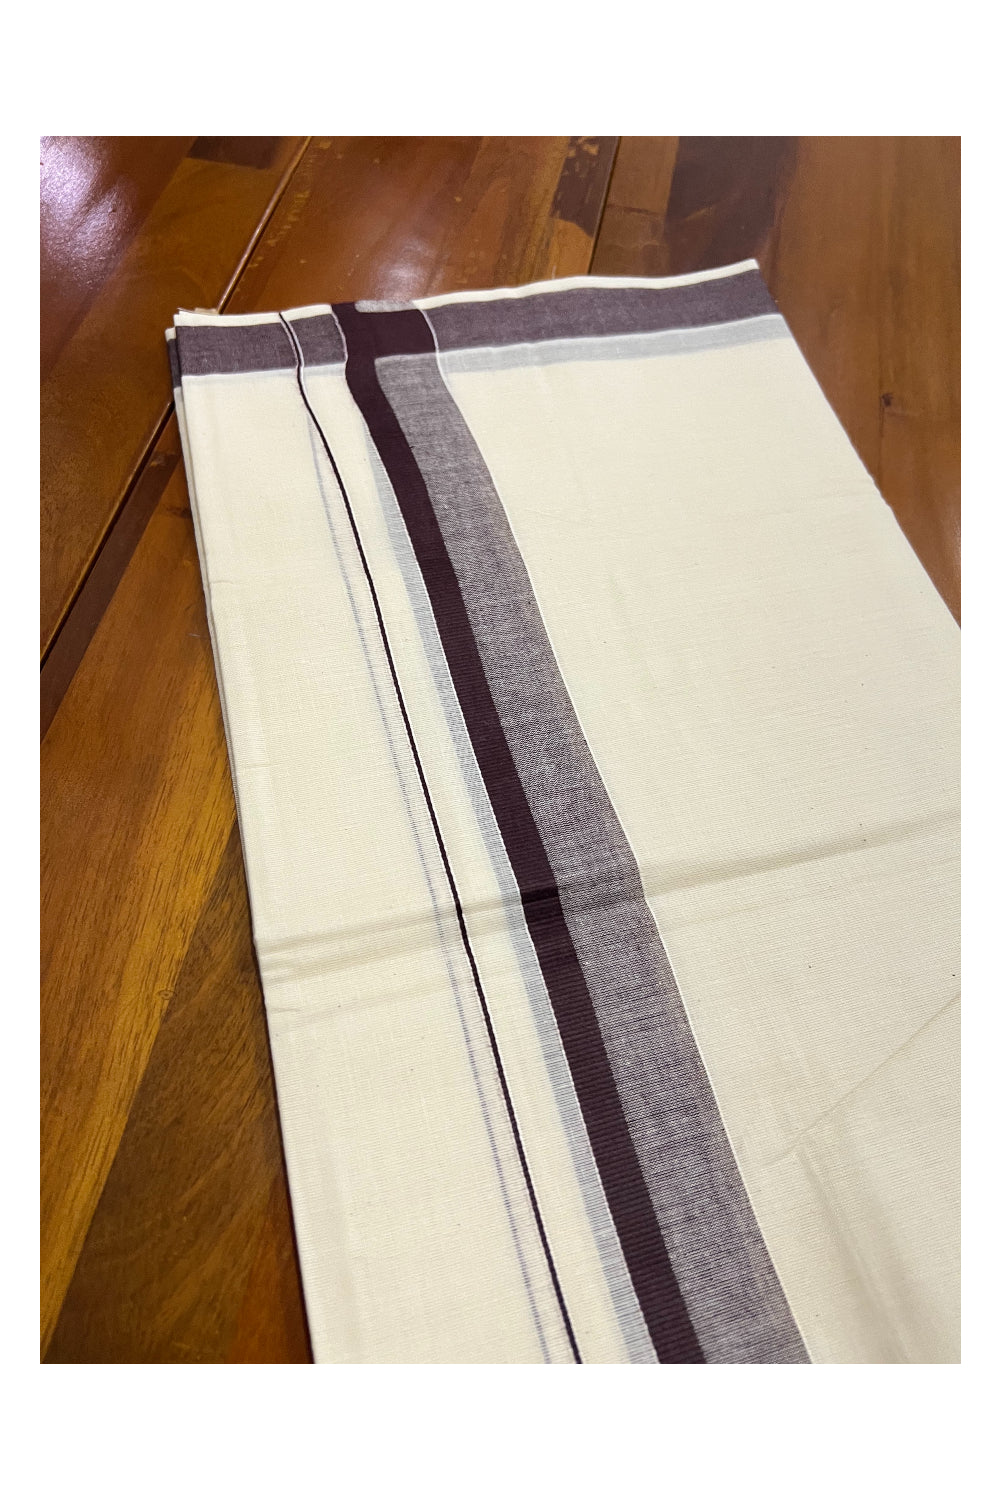 Off White Pure Cotton Double Mundu with Dark Brown Shaded Kara (South Indian Dhoti)